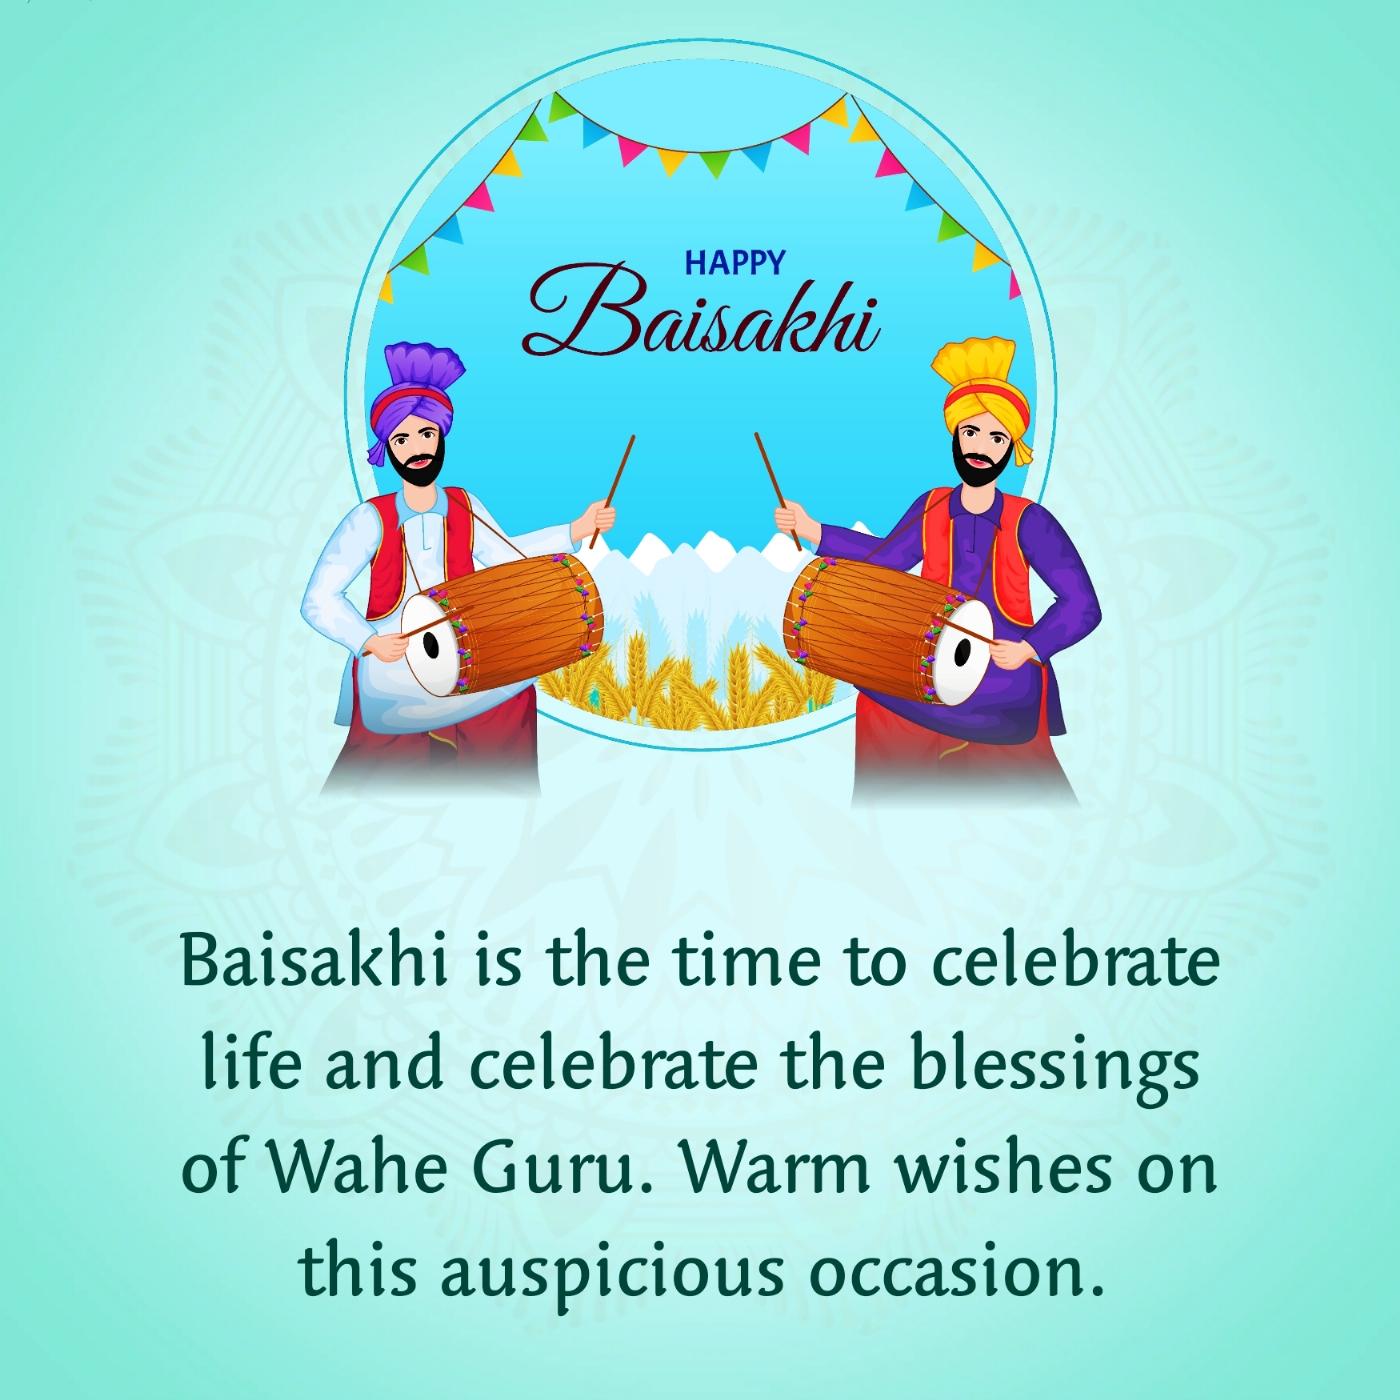 Baisakhi is the time to celebrate life and celebrate the blessings